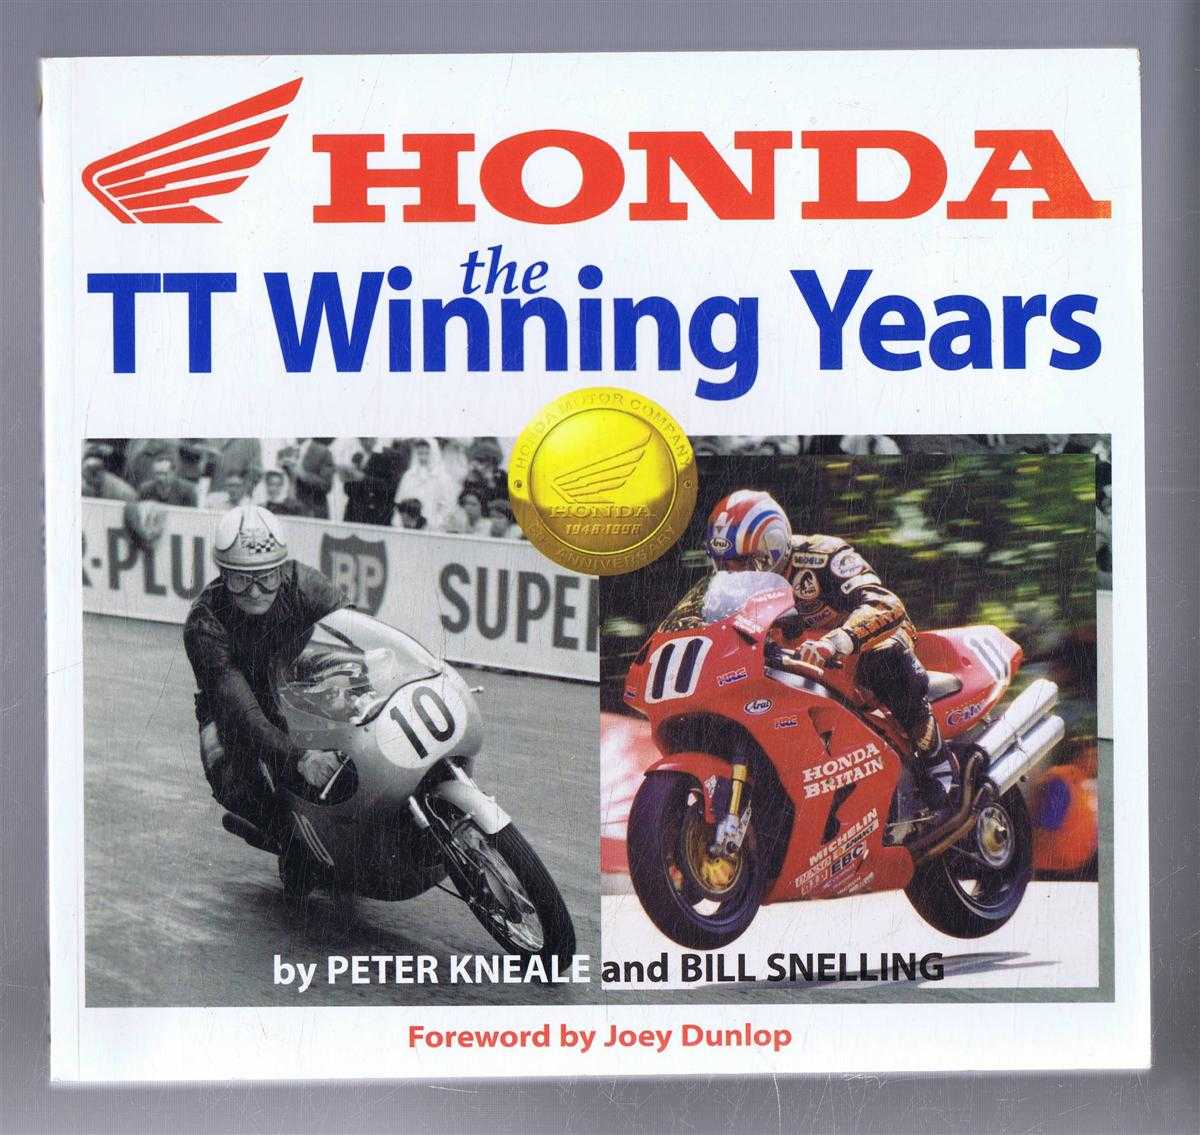 Peter Kneale and Bill Snelling, foreword by Joey Dunlop - Honda, the TT Winning Years